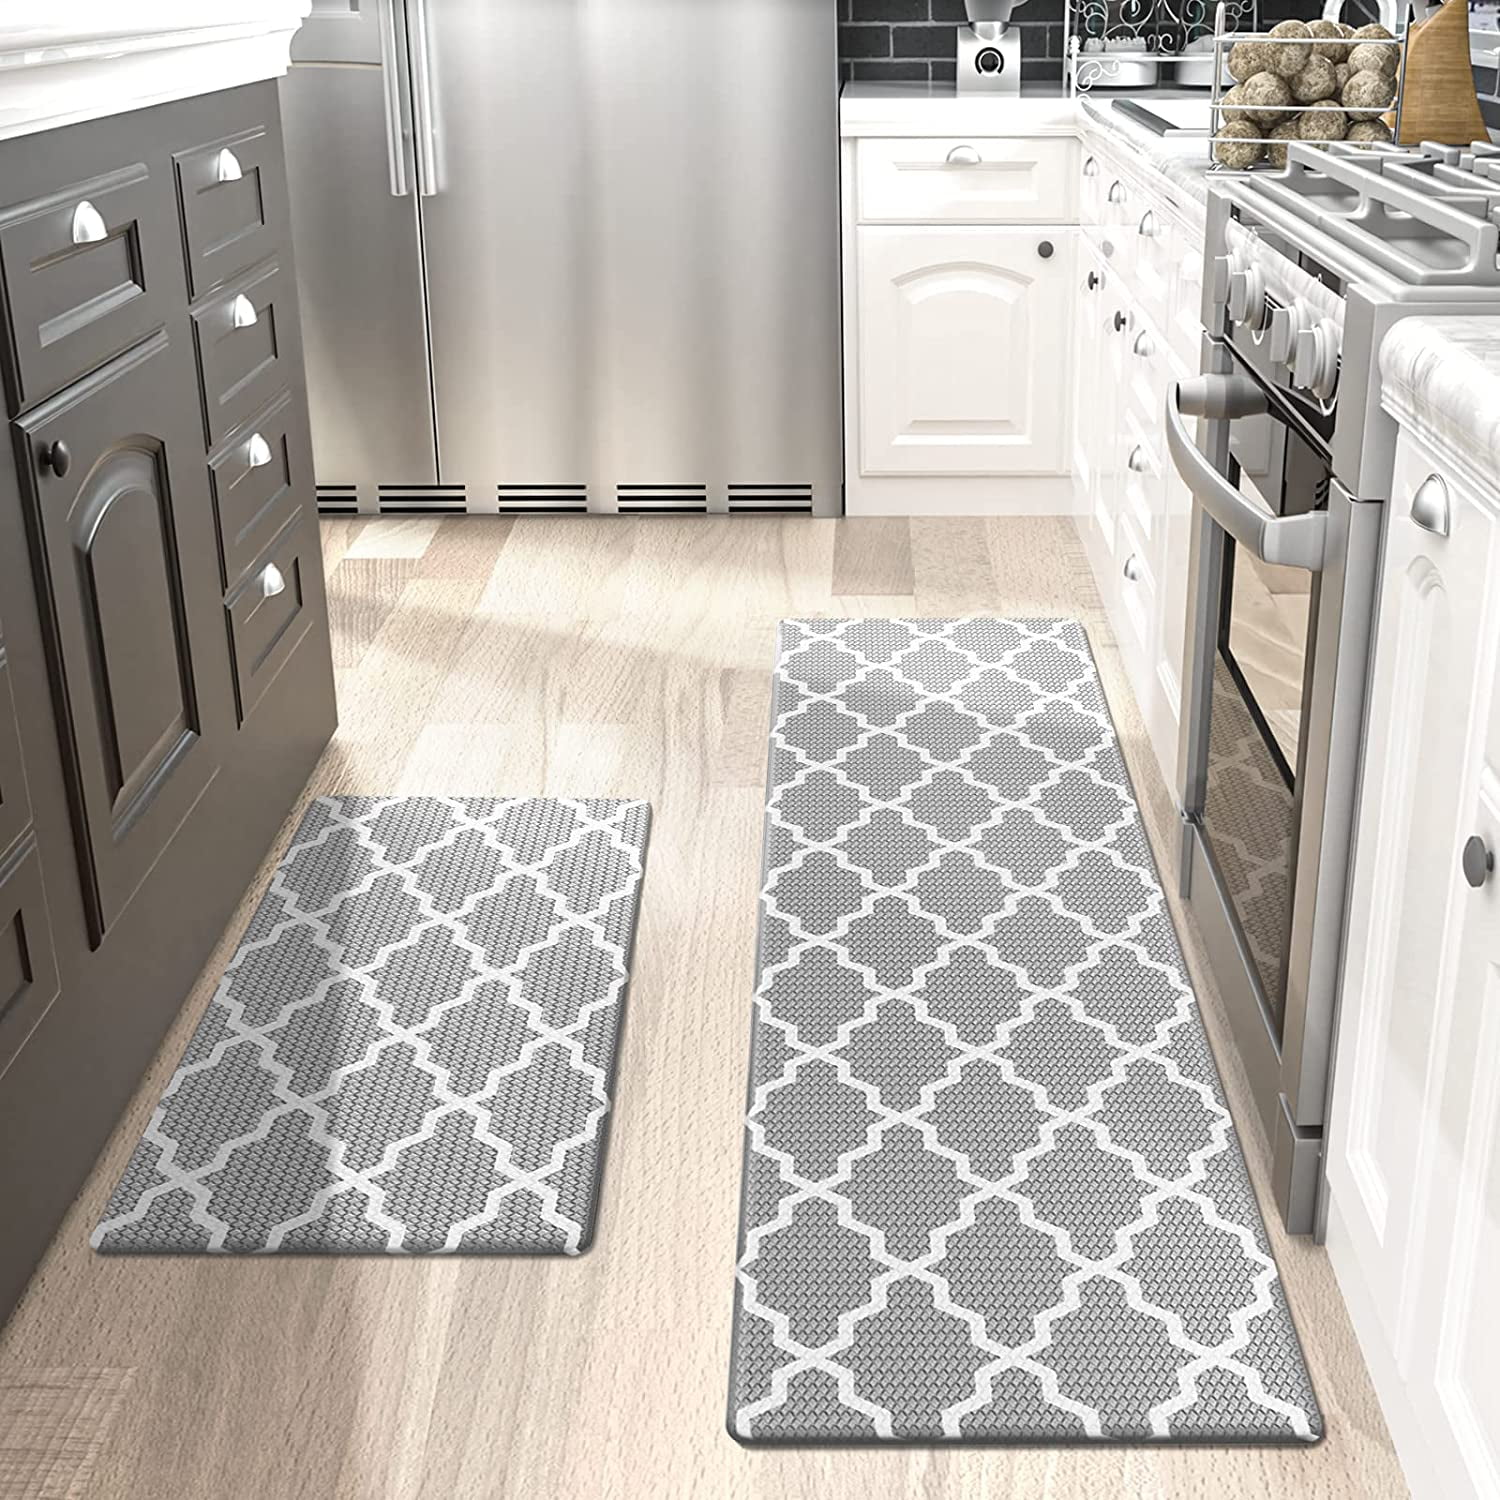 DEXI Kitchen Mat Cushioned Anti Fatigue Comfort Floor Runner Rug for  Standing Desk Office,3/4 Inch Thick Cushion 17